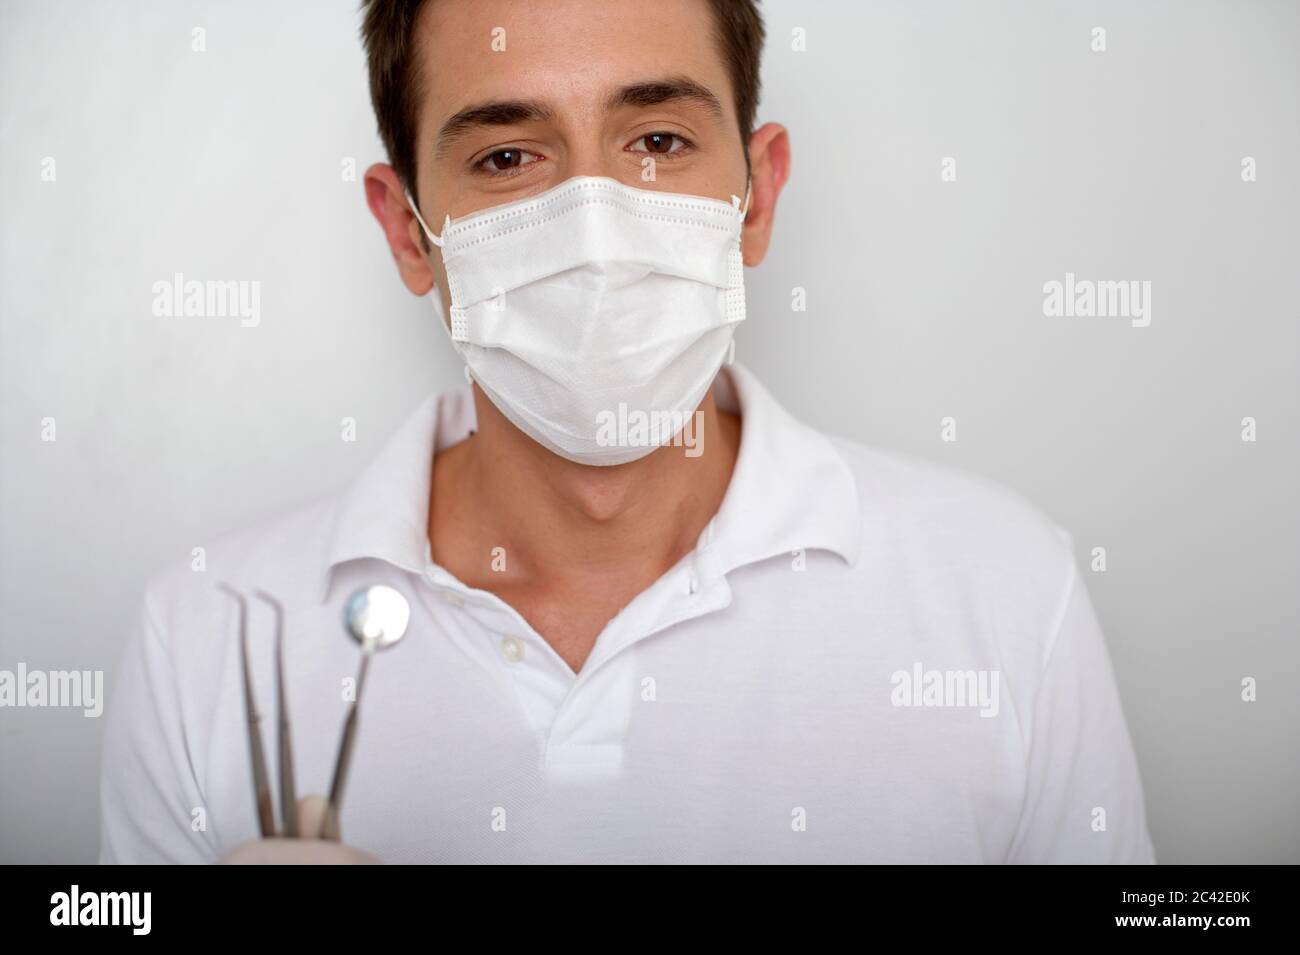 Dentist with face mask and dental examination equipment Stock Photo